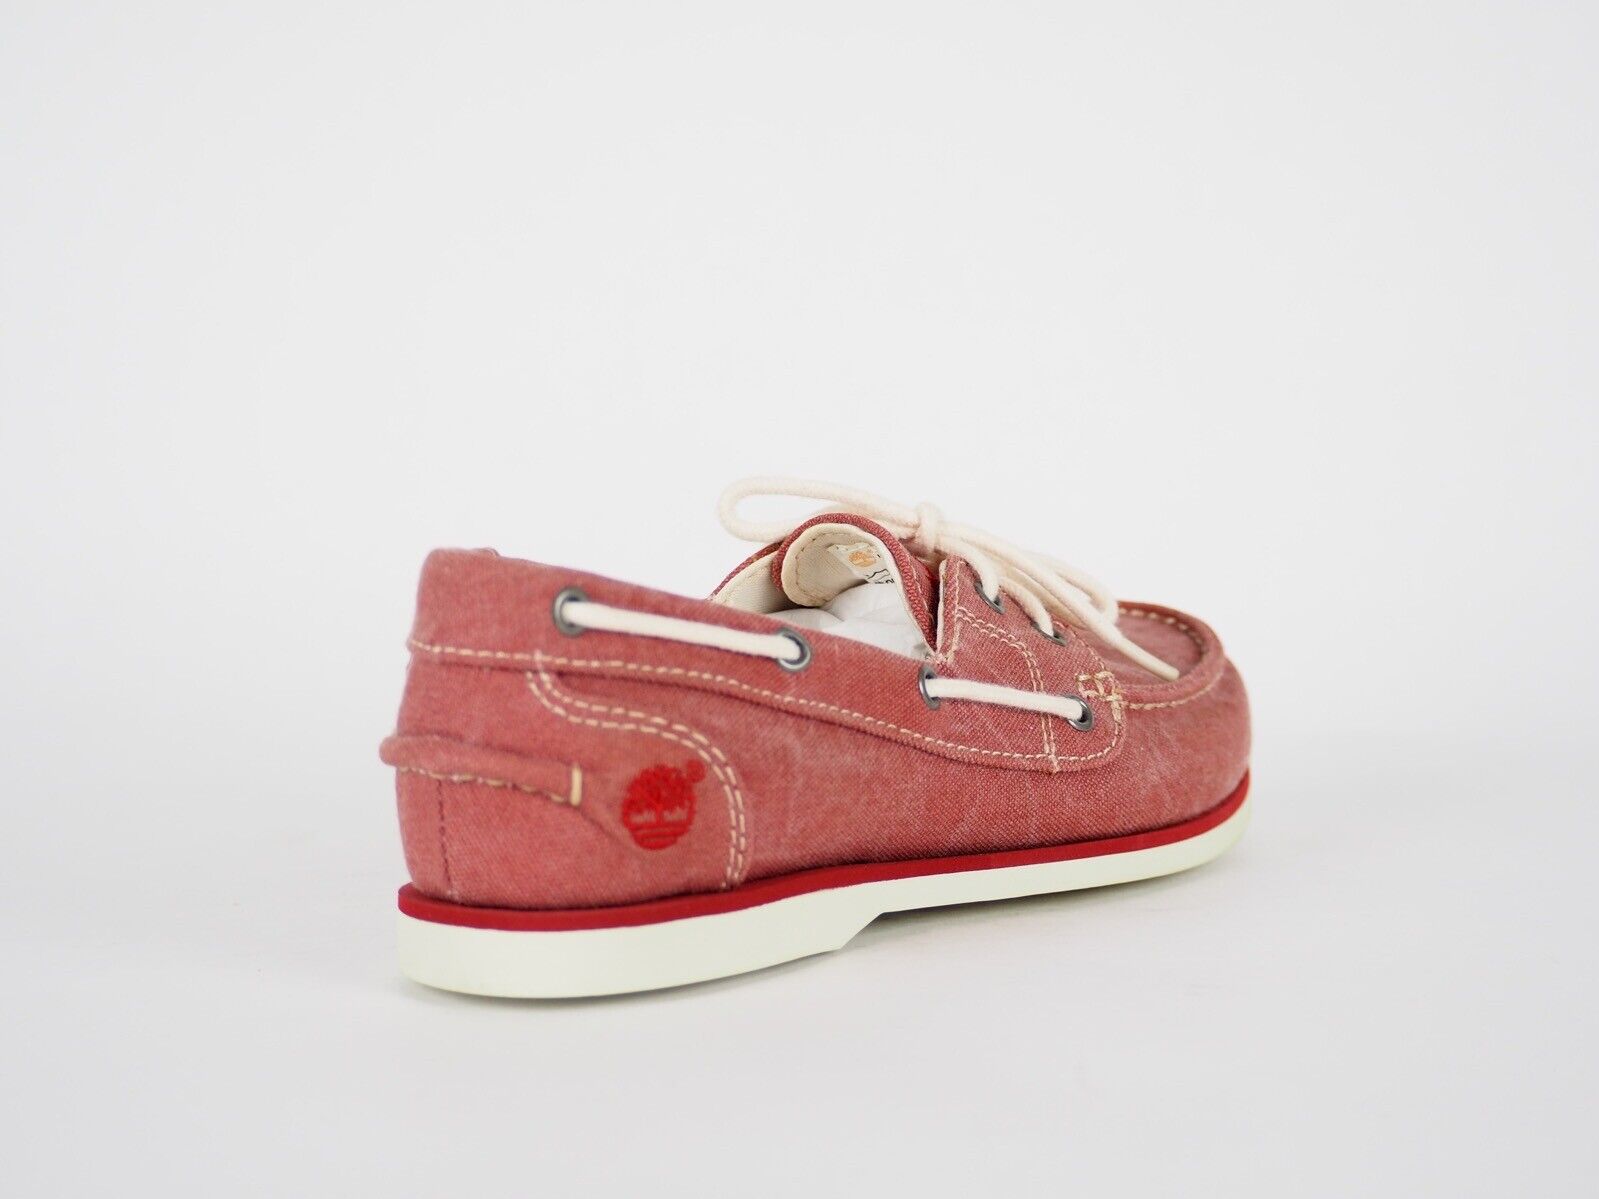 Womens Timberland 2 Eye 3929R Muted Red Canvas Slip On Boat Ladies Shoes - London Top Style